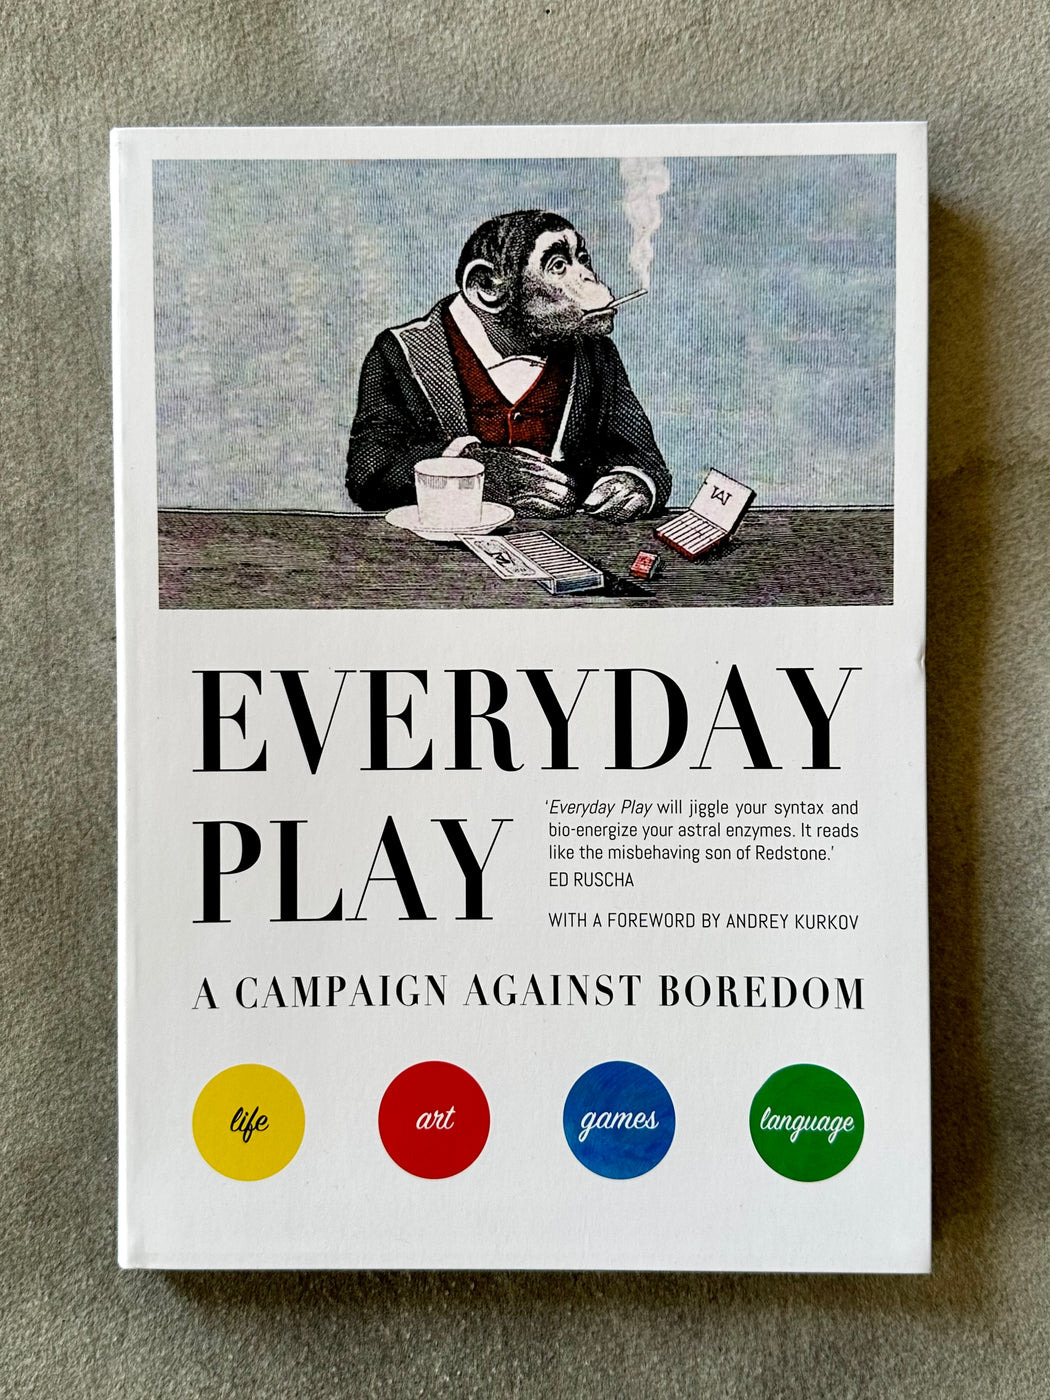 "Everyday Play" edited by Julian Rothenstein